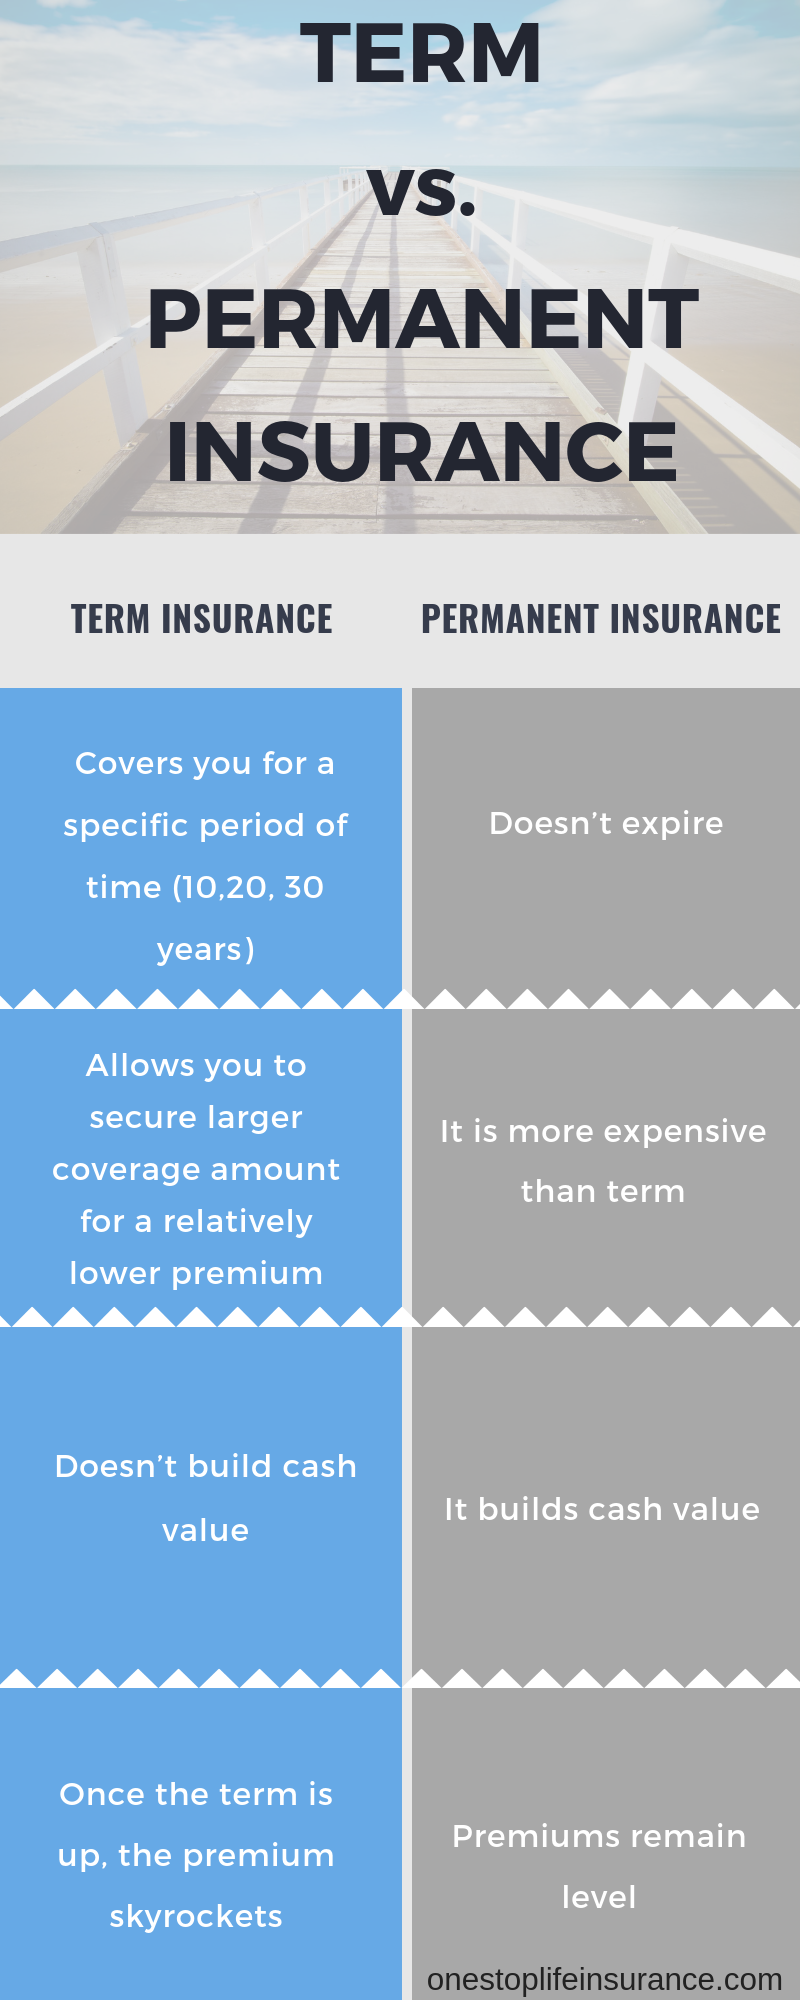 Life insurance on your child's father. Infographic on term vs permanent insurance